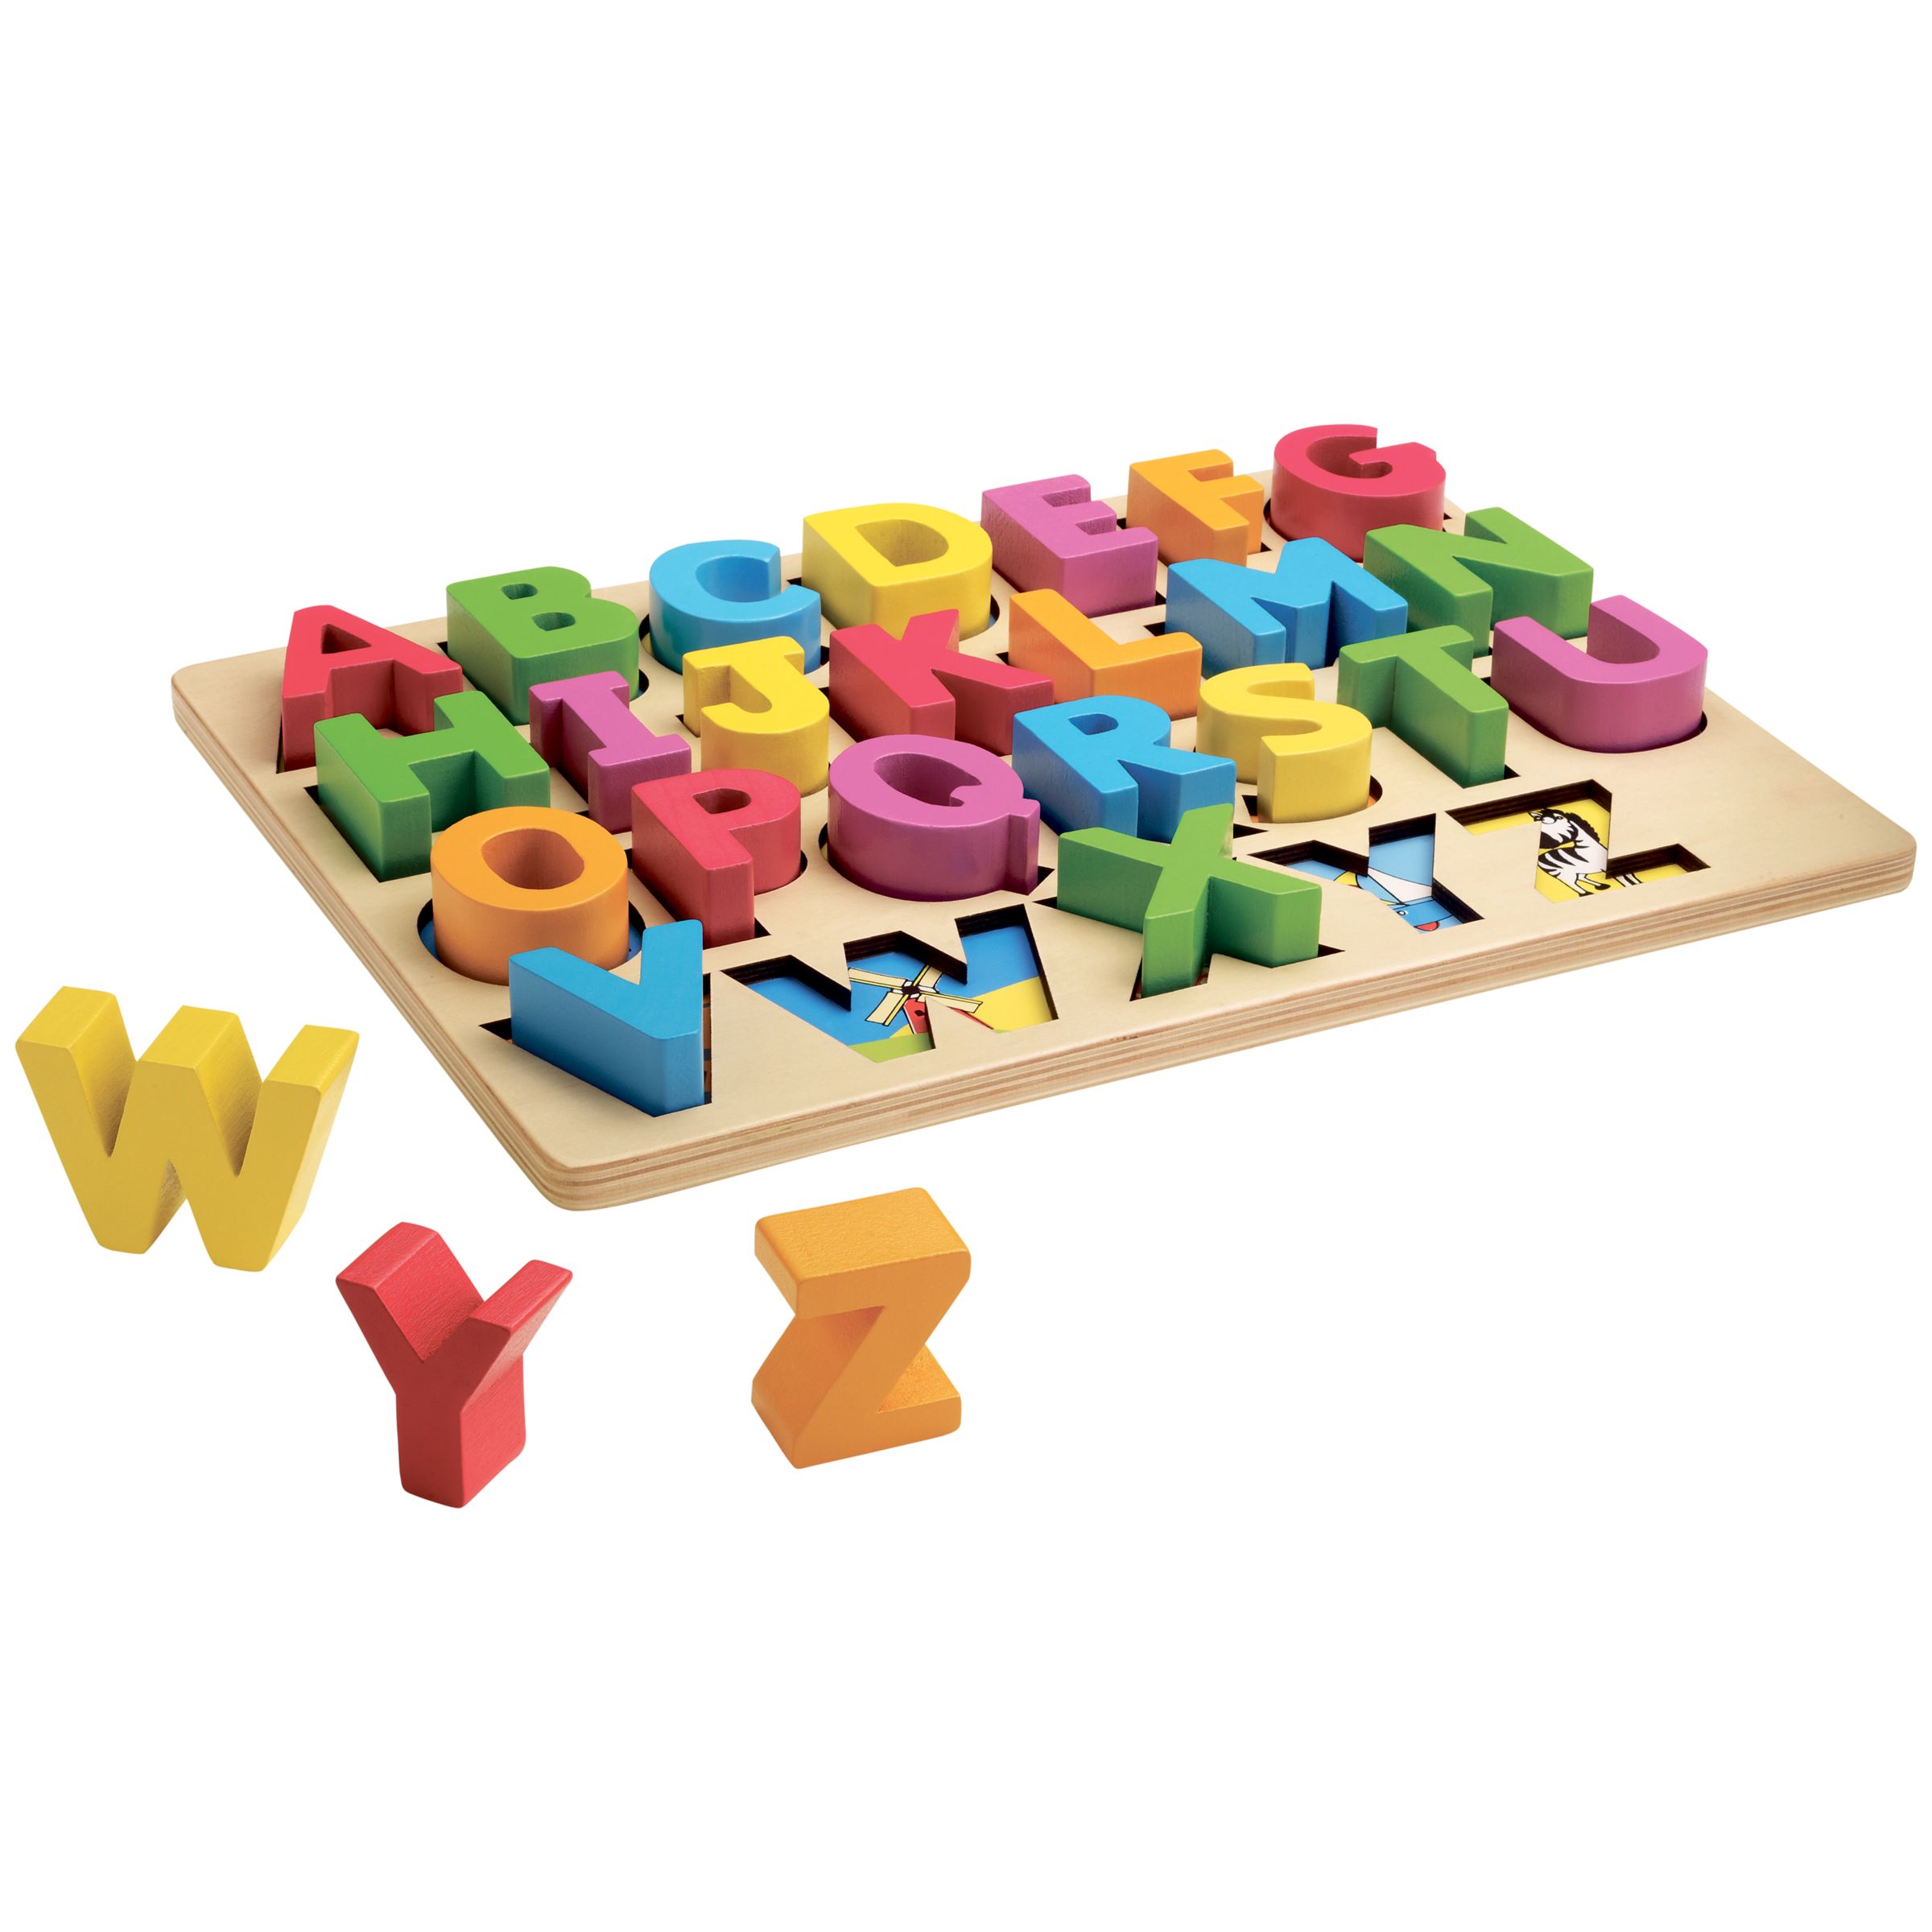 John Lewis & Partners Chunky Wooden ABC Puzzle